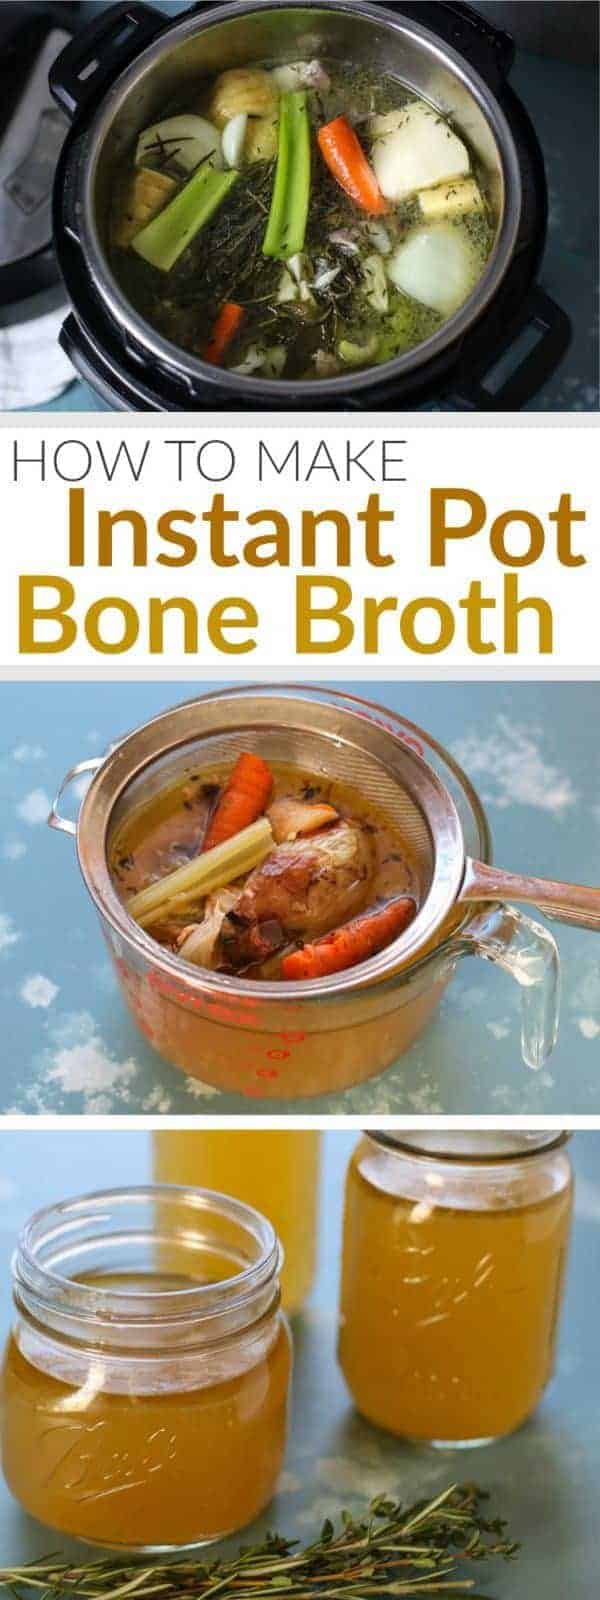 pinterest image for how to make instant pot bone broth